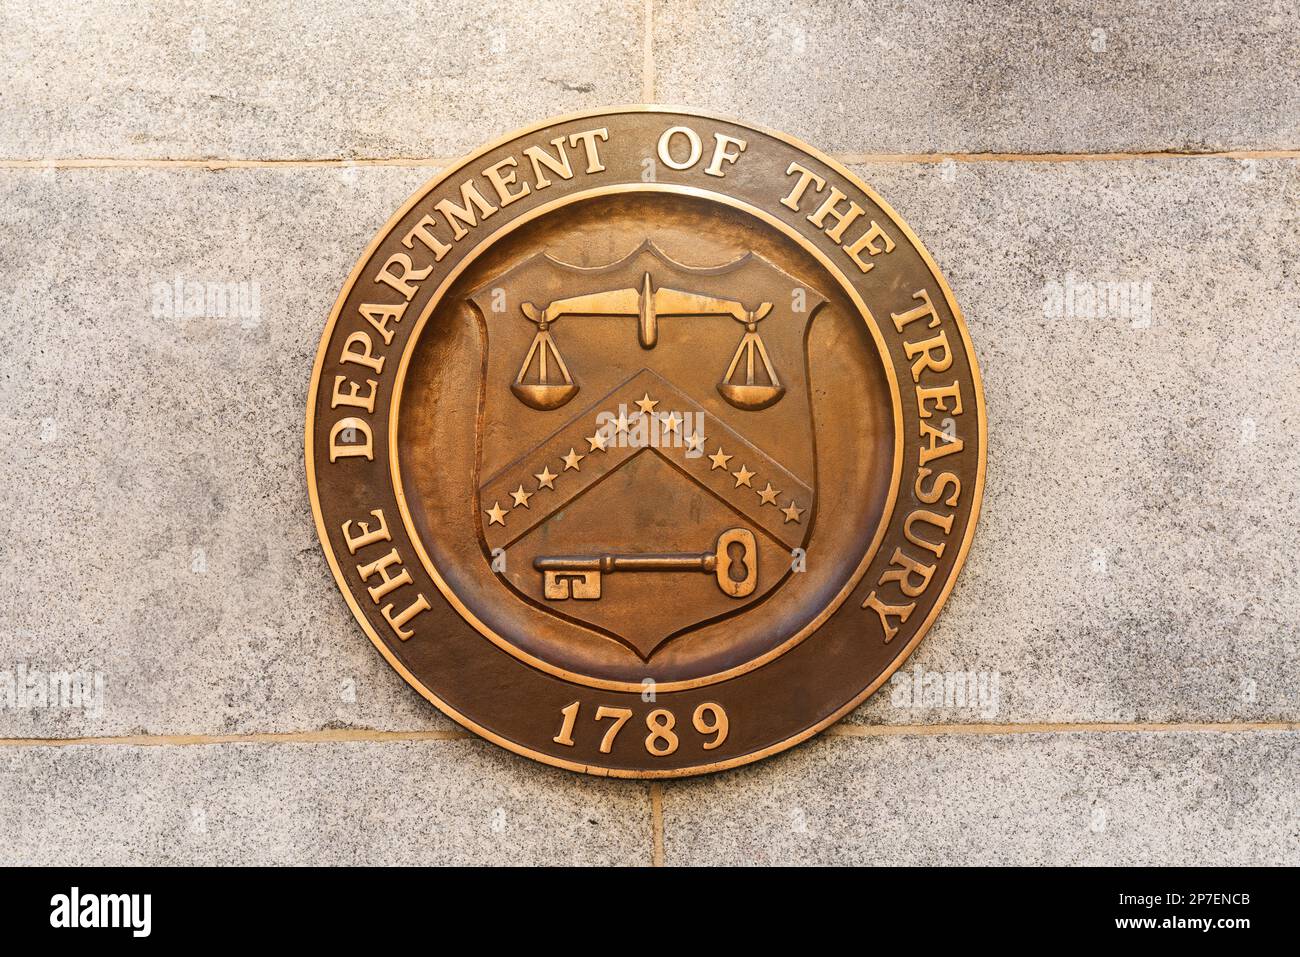 United States Department of the Treasury in Washington, D.C., USA. Seal on the building. Stock Photo